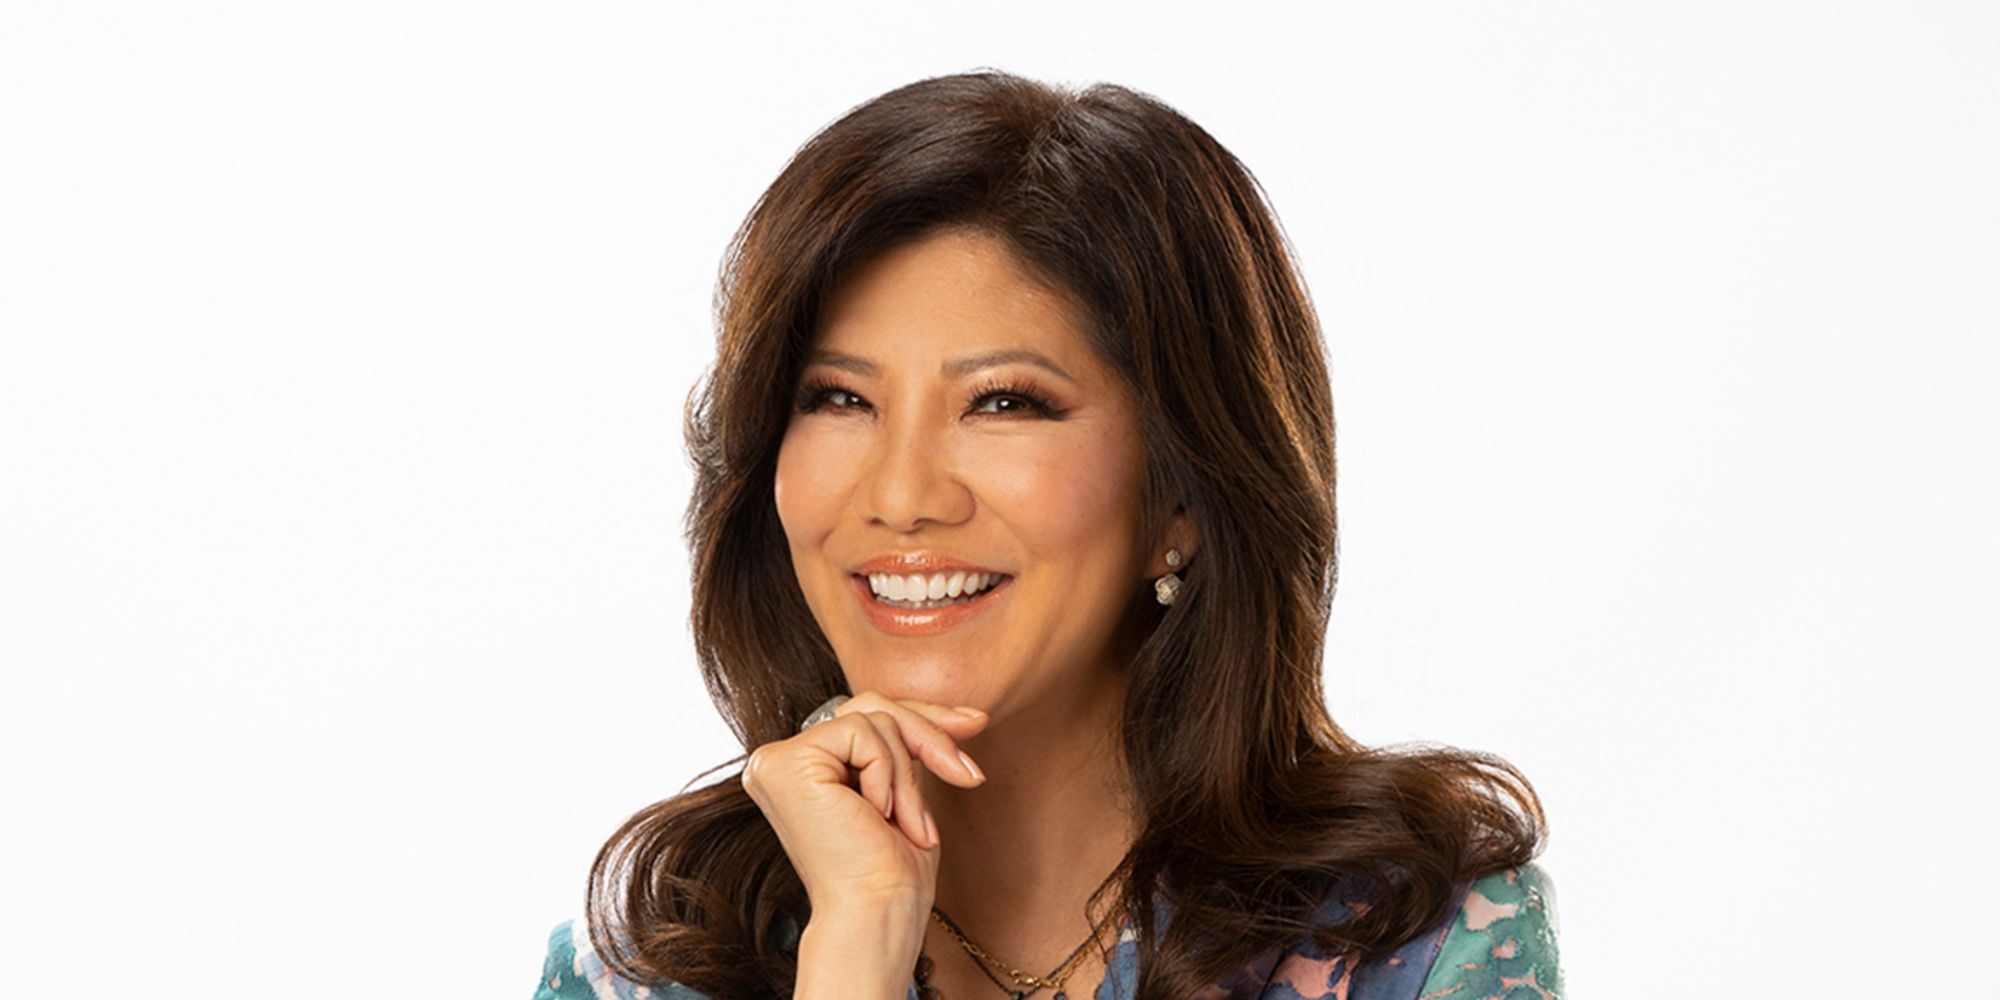 A promotional photo of Julie Chen with her hand on her chin, on a white background.